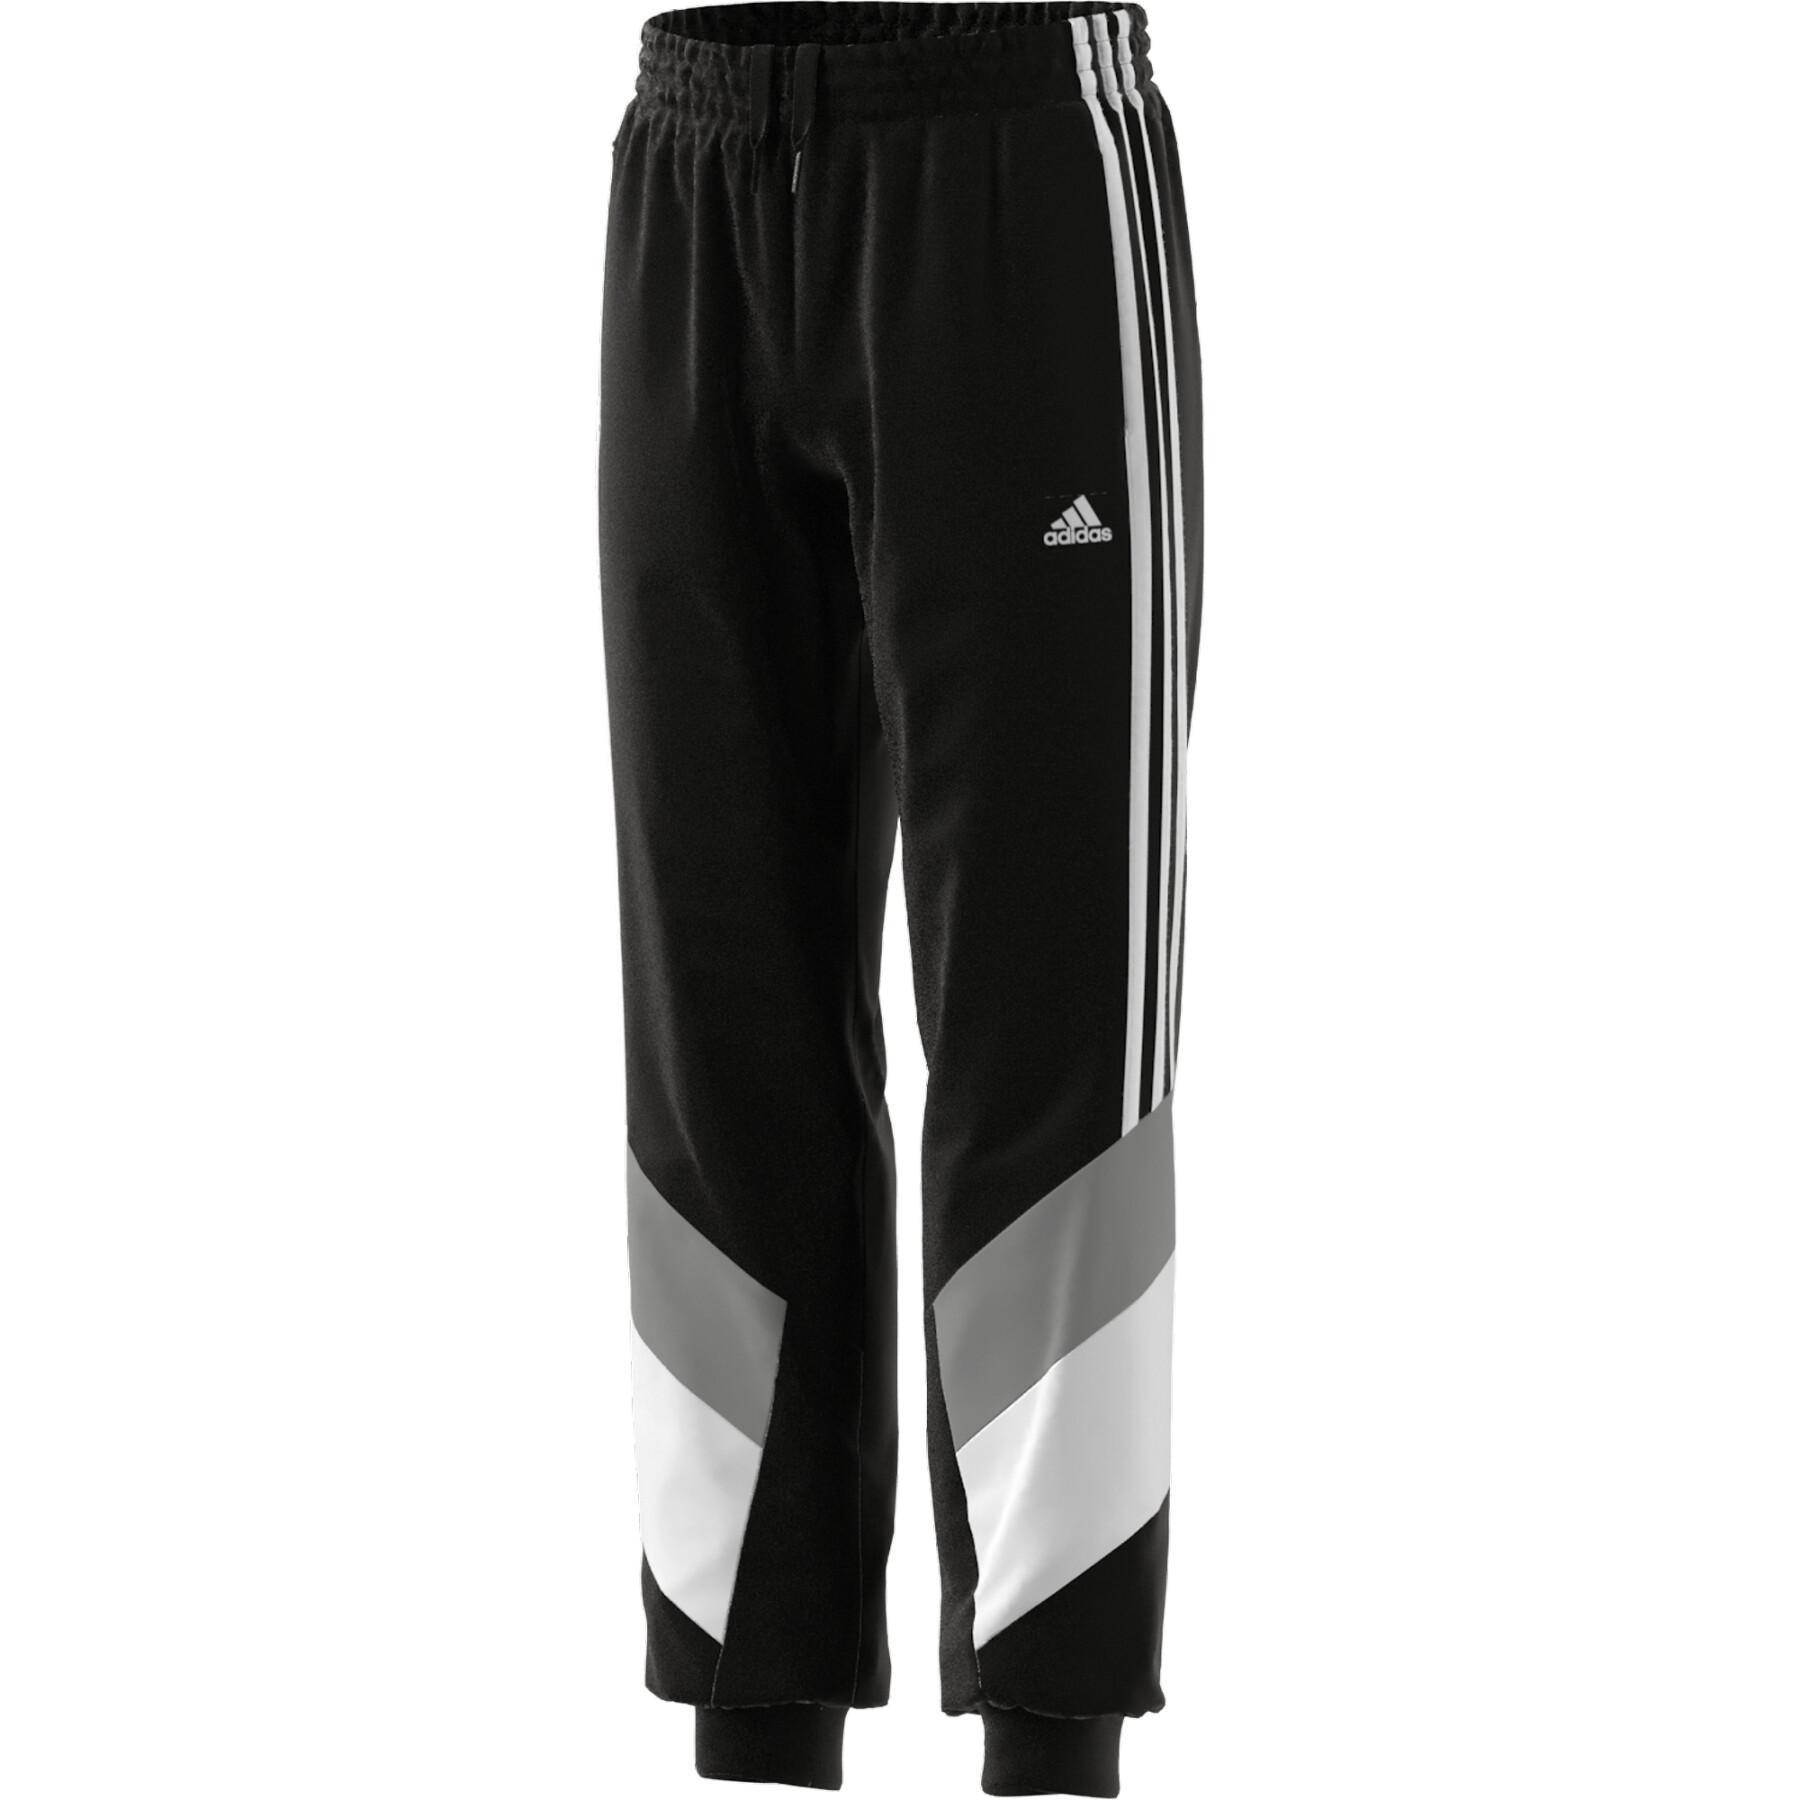 Children's trousers adidas Colorblock Woven